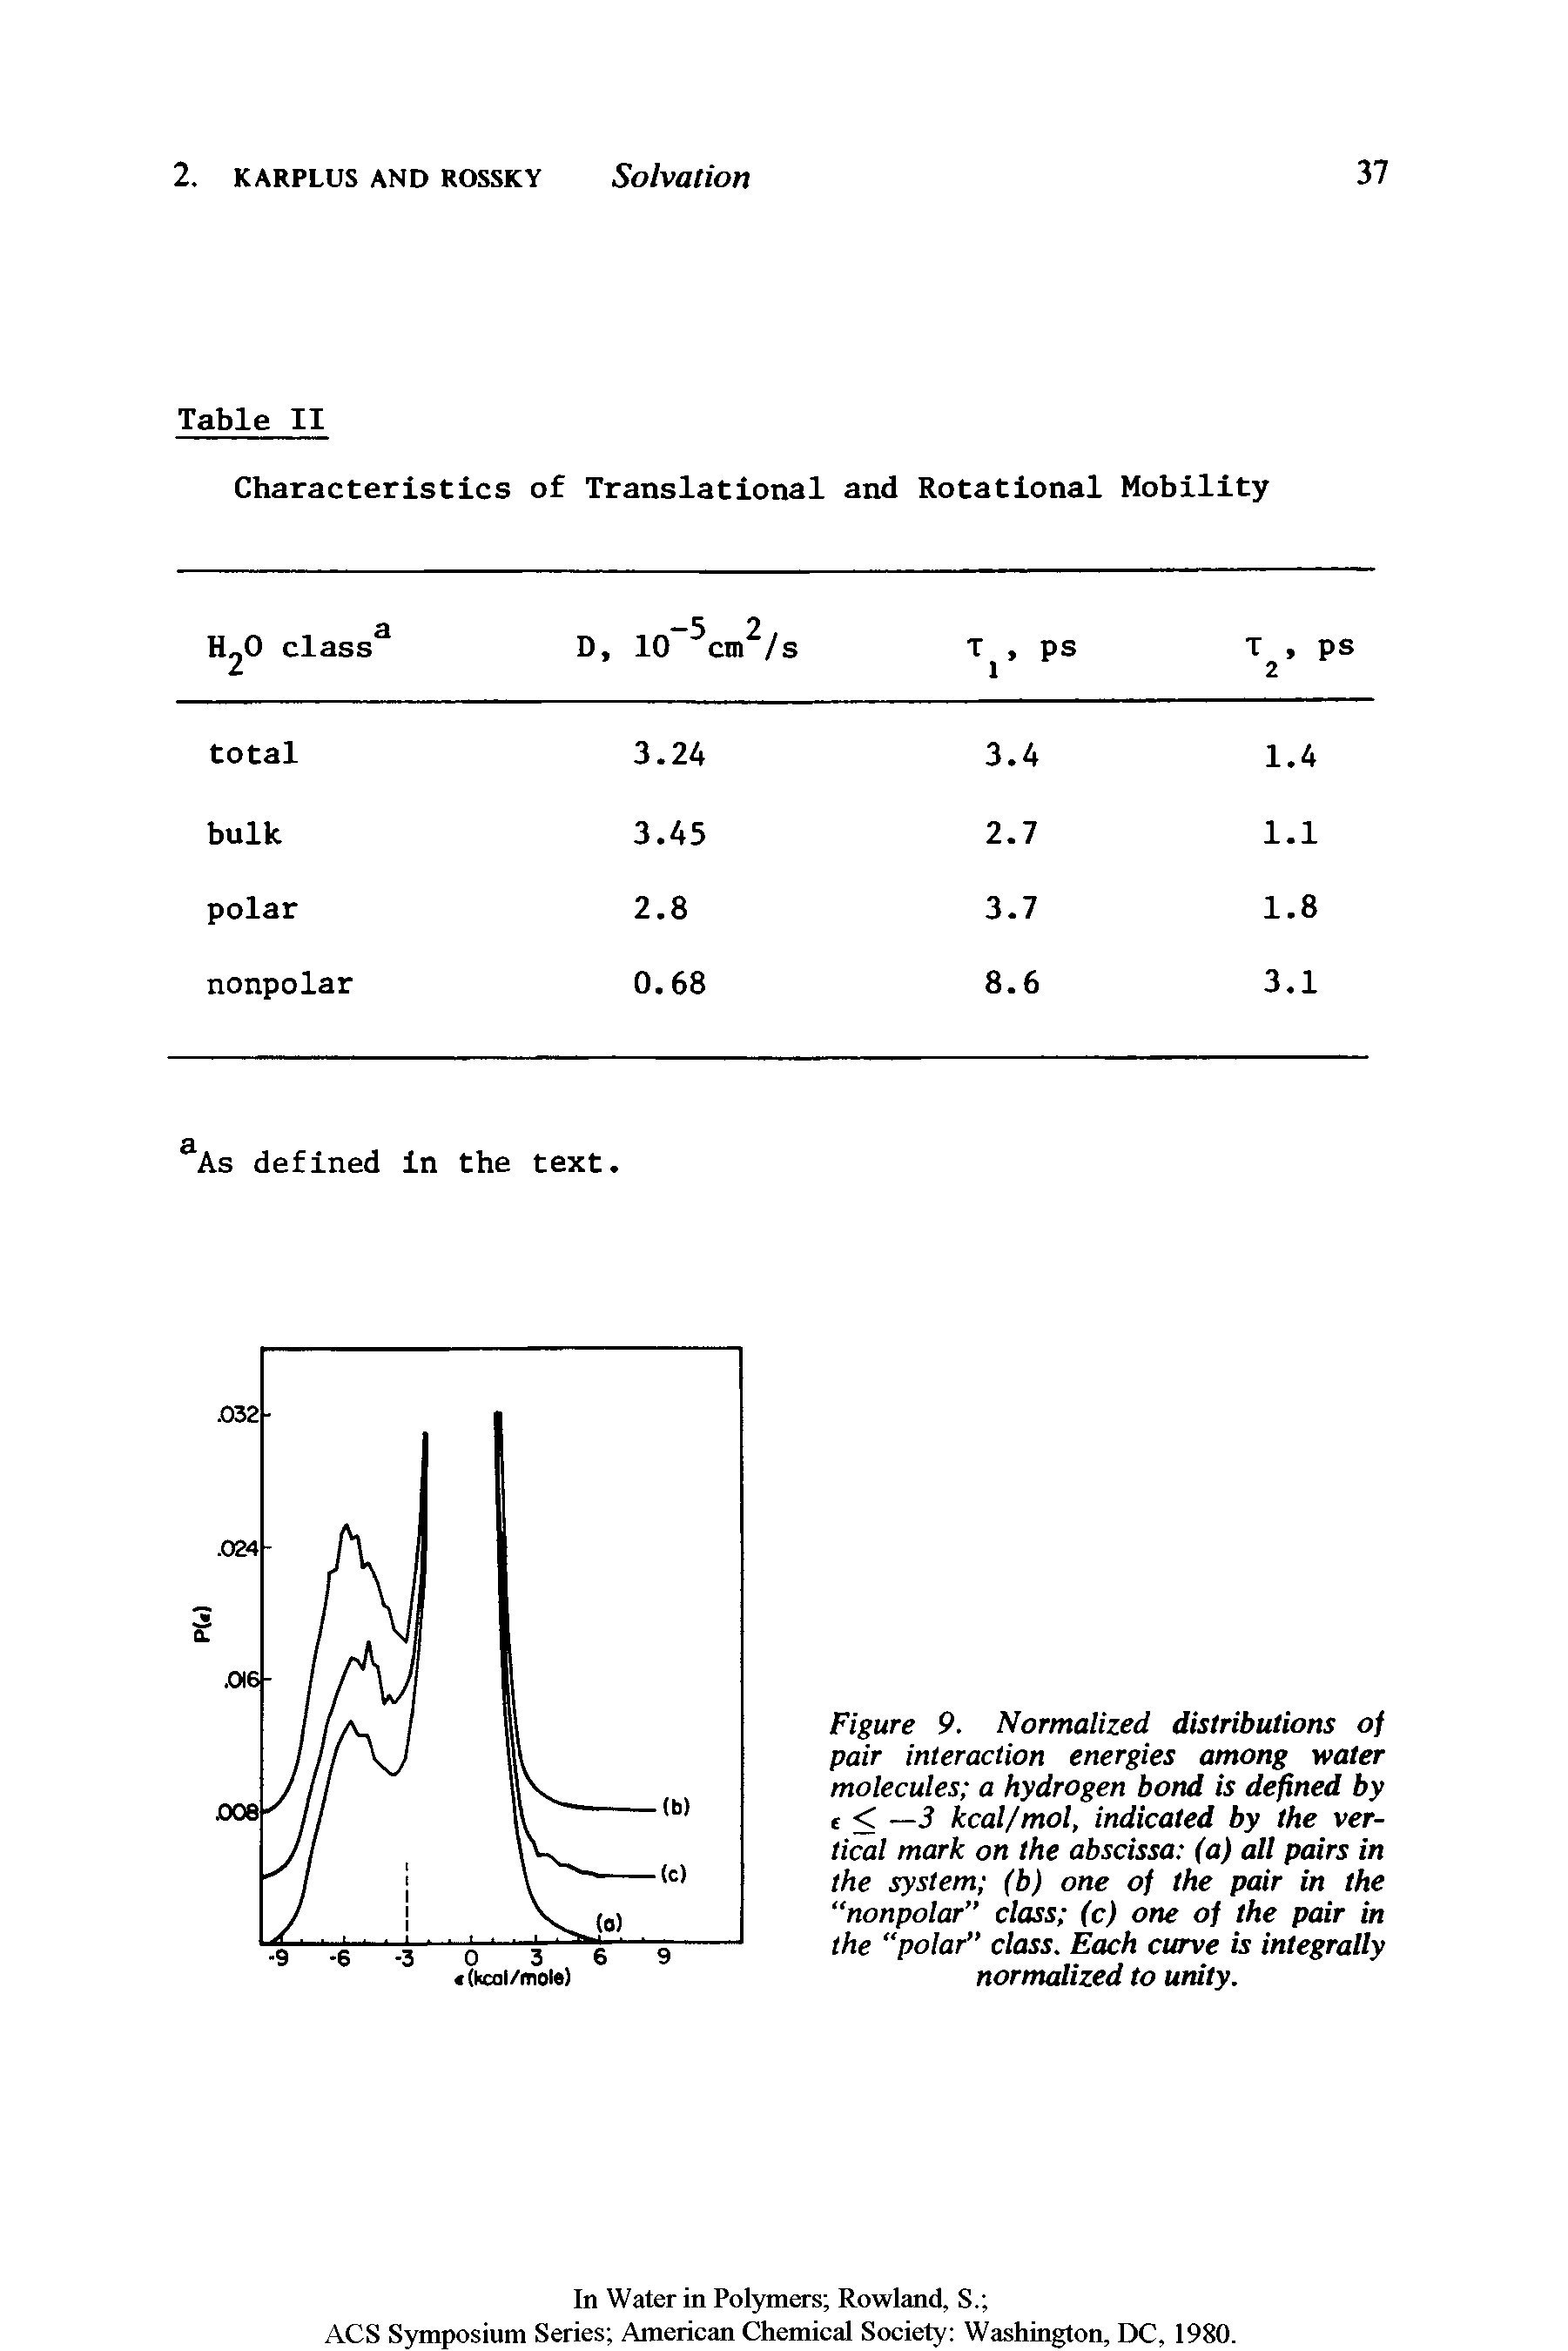 Figure 9. Normalized distributions of pair interaction energies among water molecules a hydrogen bond is defined by < —3 kcal/mol, indicated by the vertical mark on the abscissa (a) alt pairs in the system (b) one of the pair in the nonpolar class (c) one of the pair in the polar class. Each curve is integrally normalized to unity.